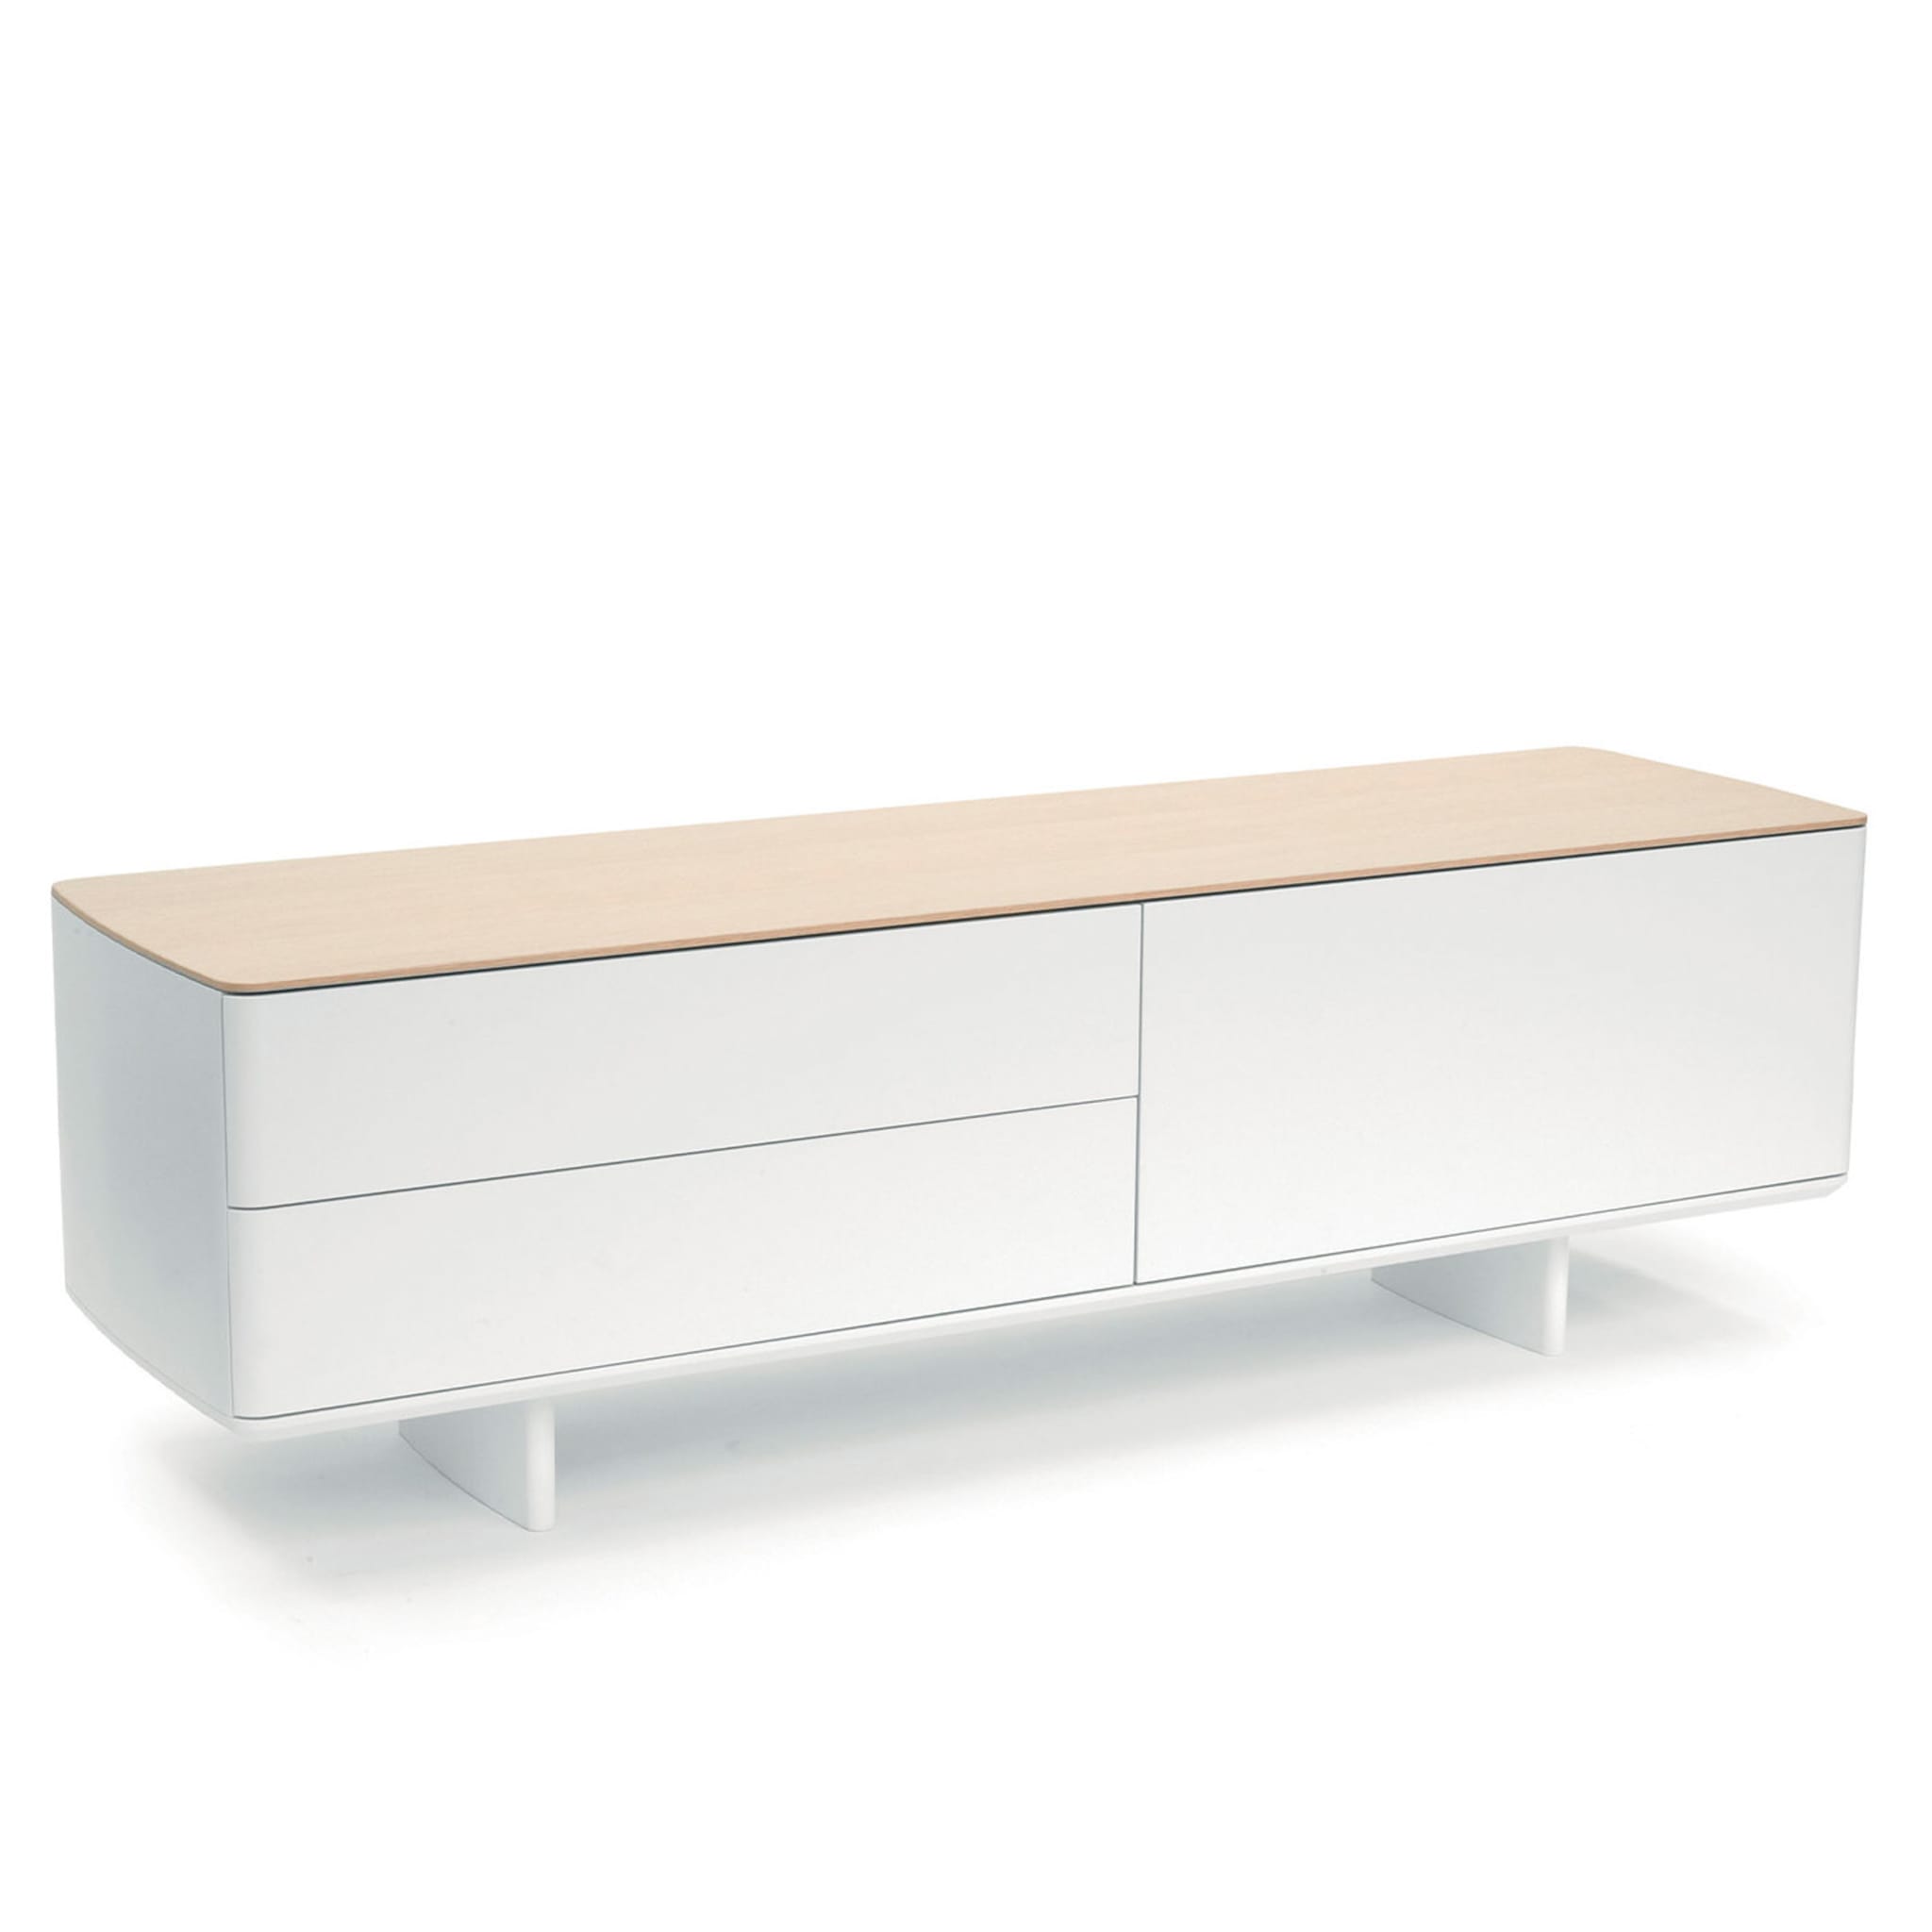 Shift White and Durmast Sideboard by Foster + Partners - Alternative view 1